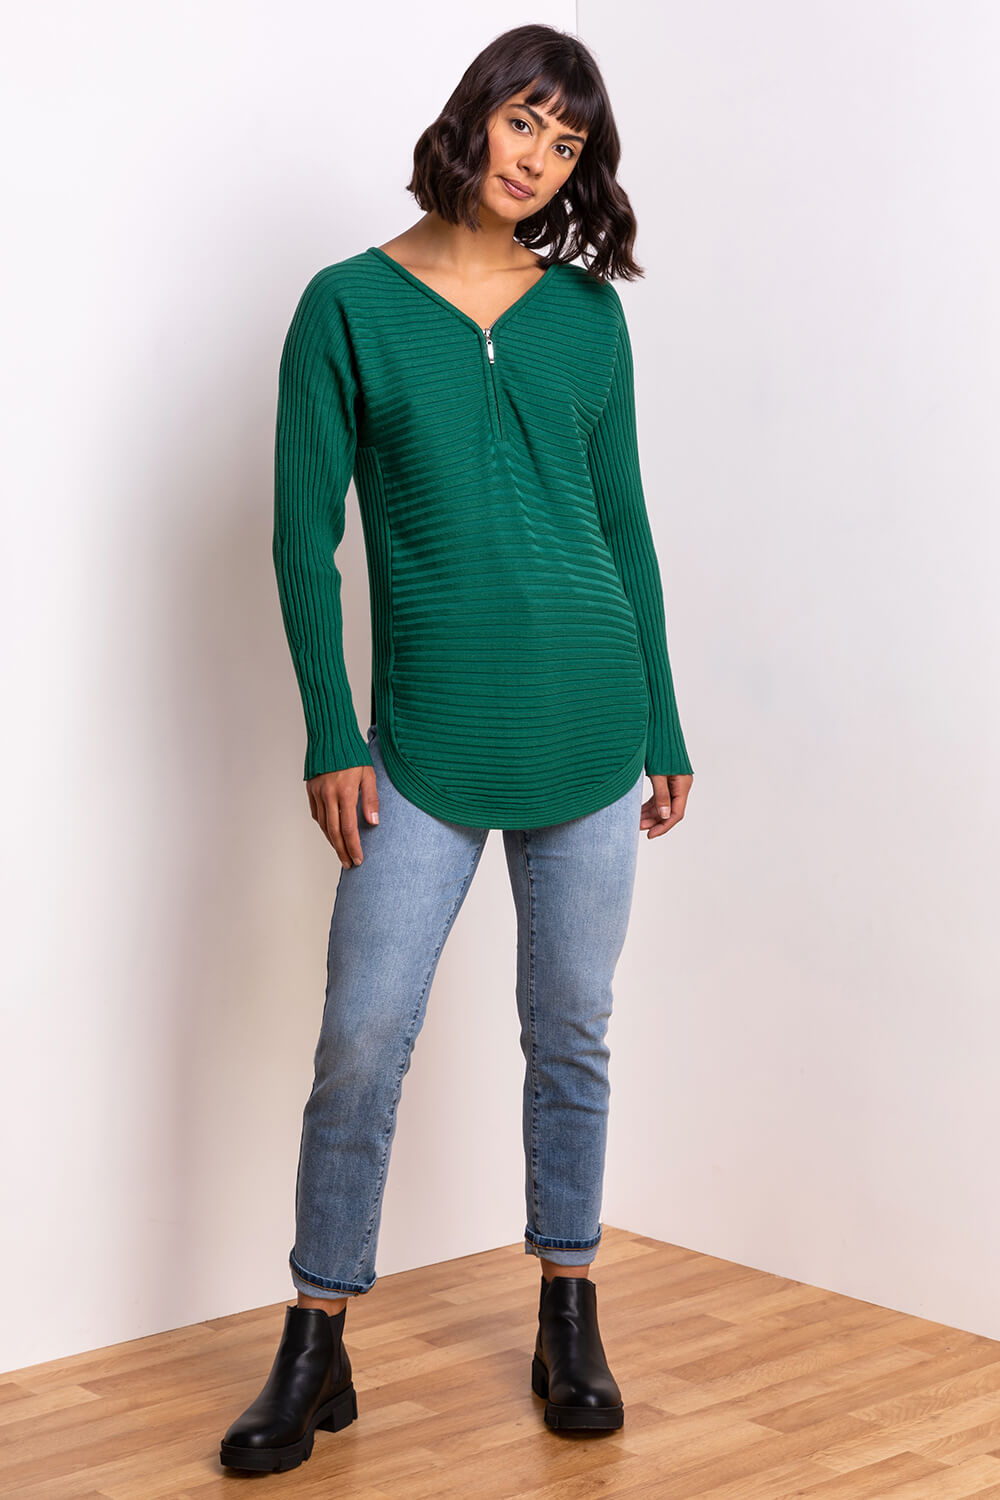 Green Zip Front V Neck Jersey Long Sleeve Top, Image 3 of 5